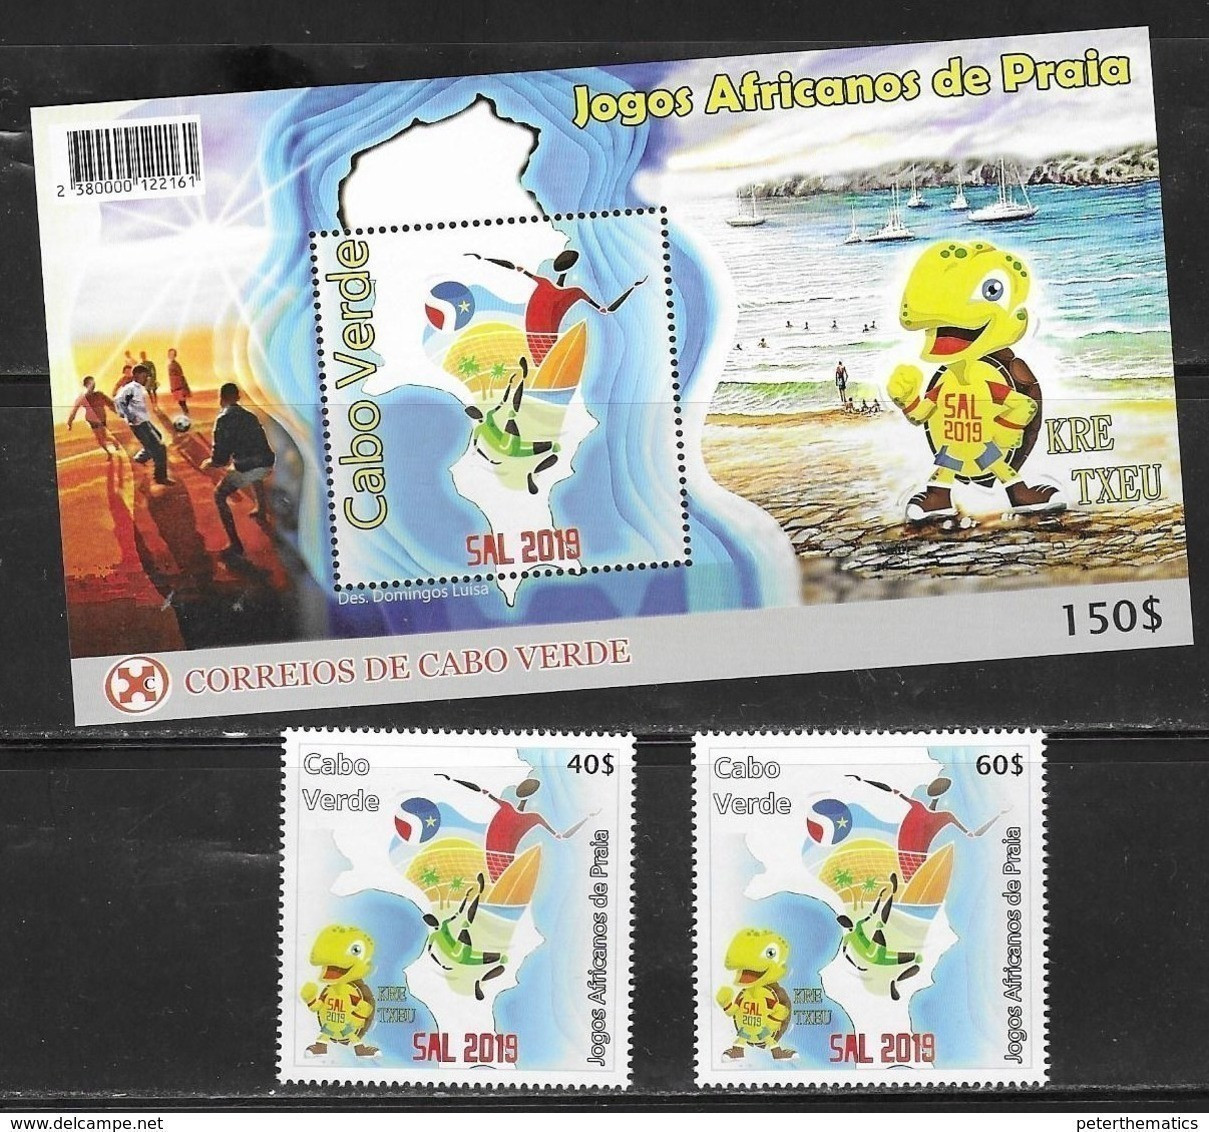 CAPE VERDE, 2019, MNH,AFRICAN GAMES OF PRAIA, VOLLEYBALL, SURFING, FOOTBALL, YACHTS, SHIPS, TURTLES, 2v+S/SHEET - Pallavolo